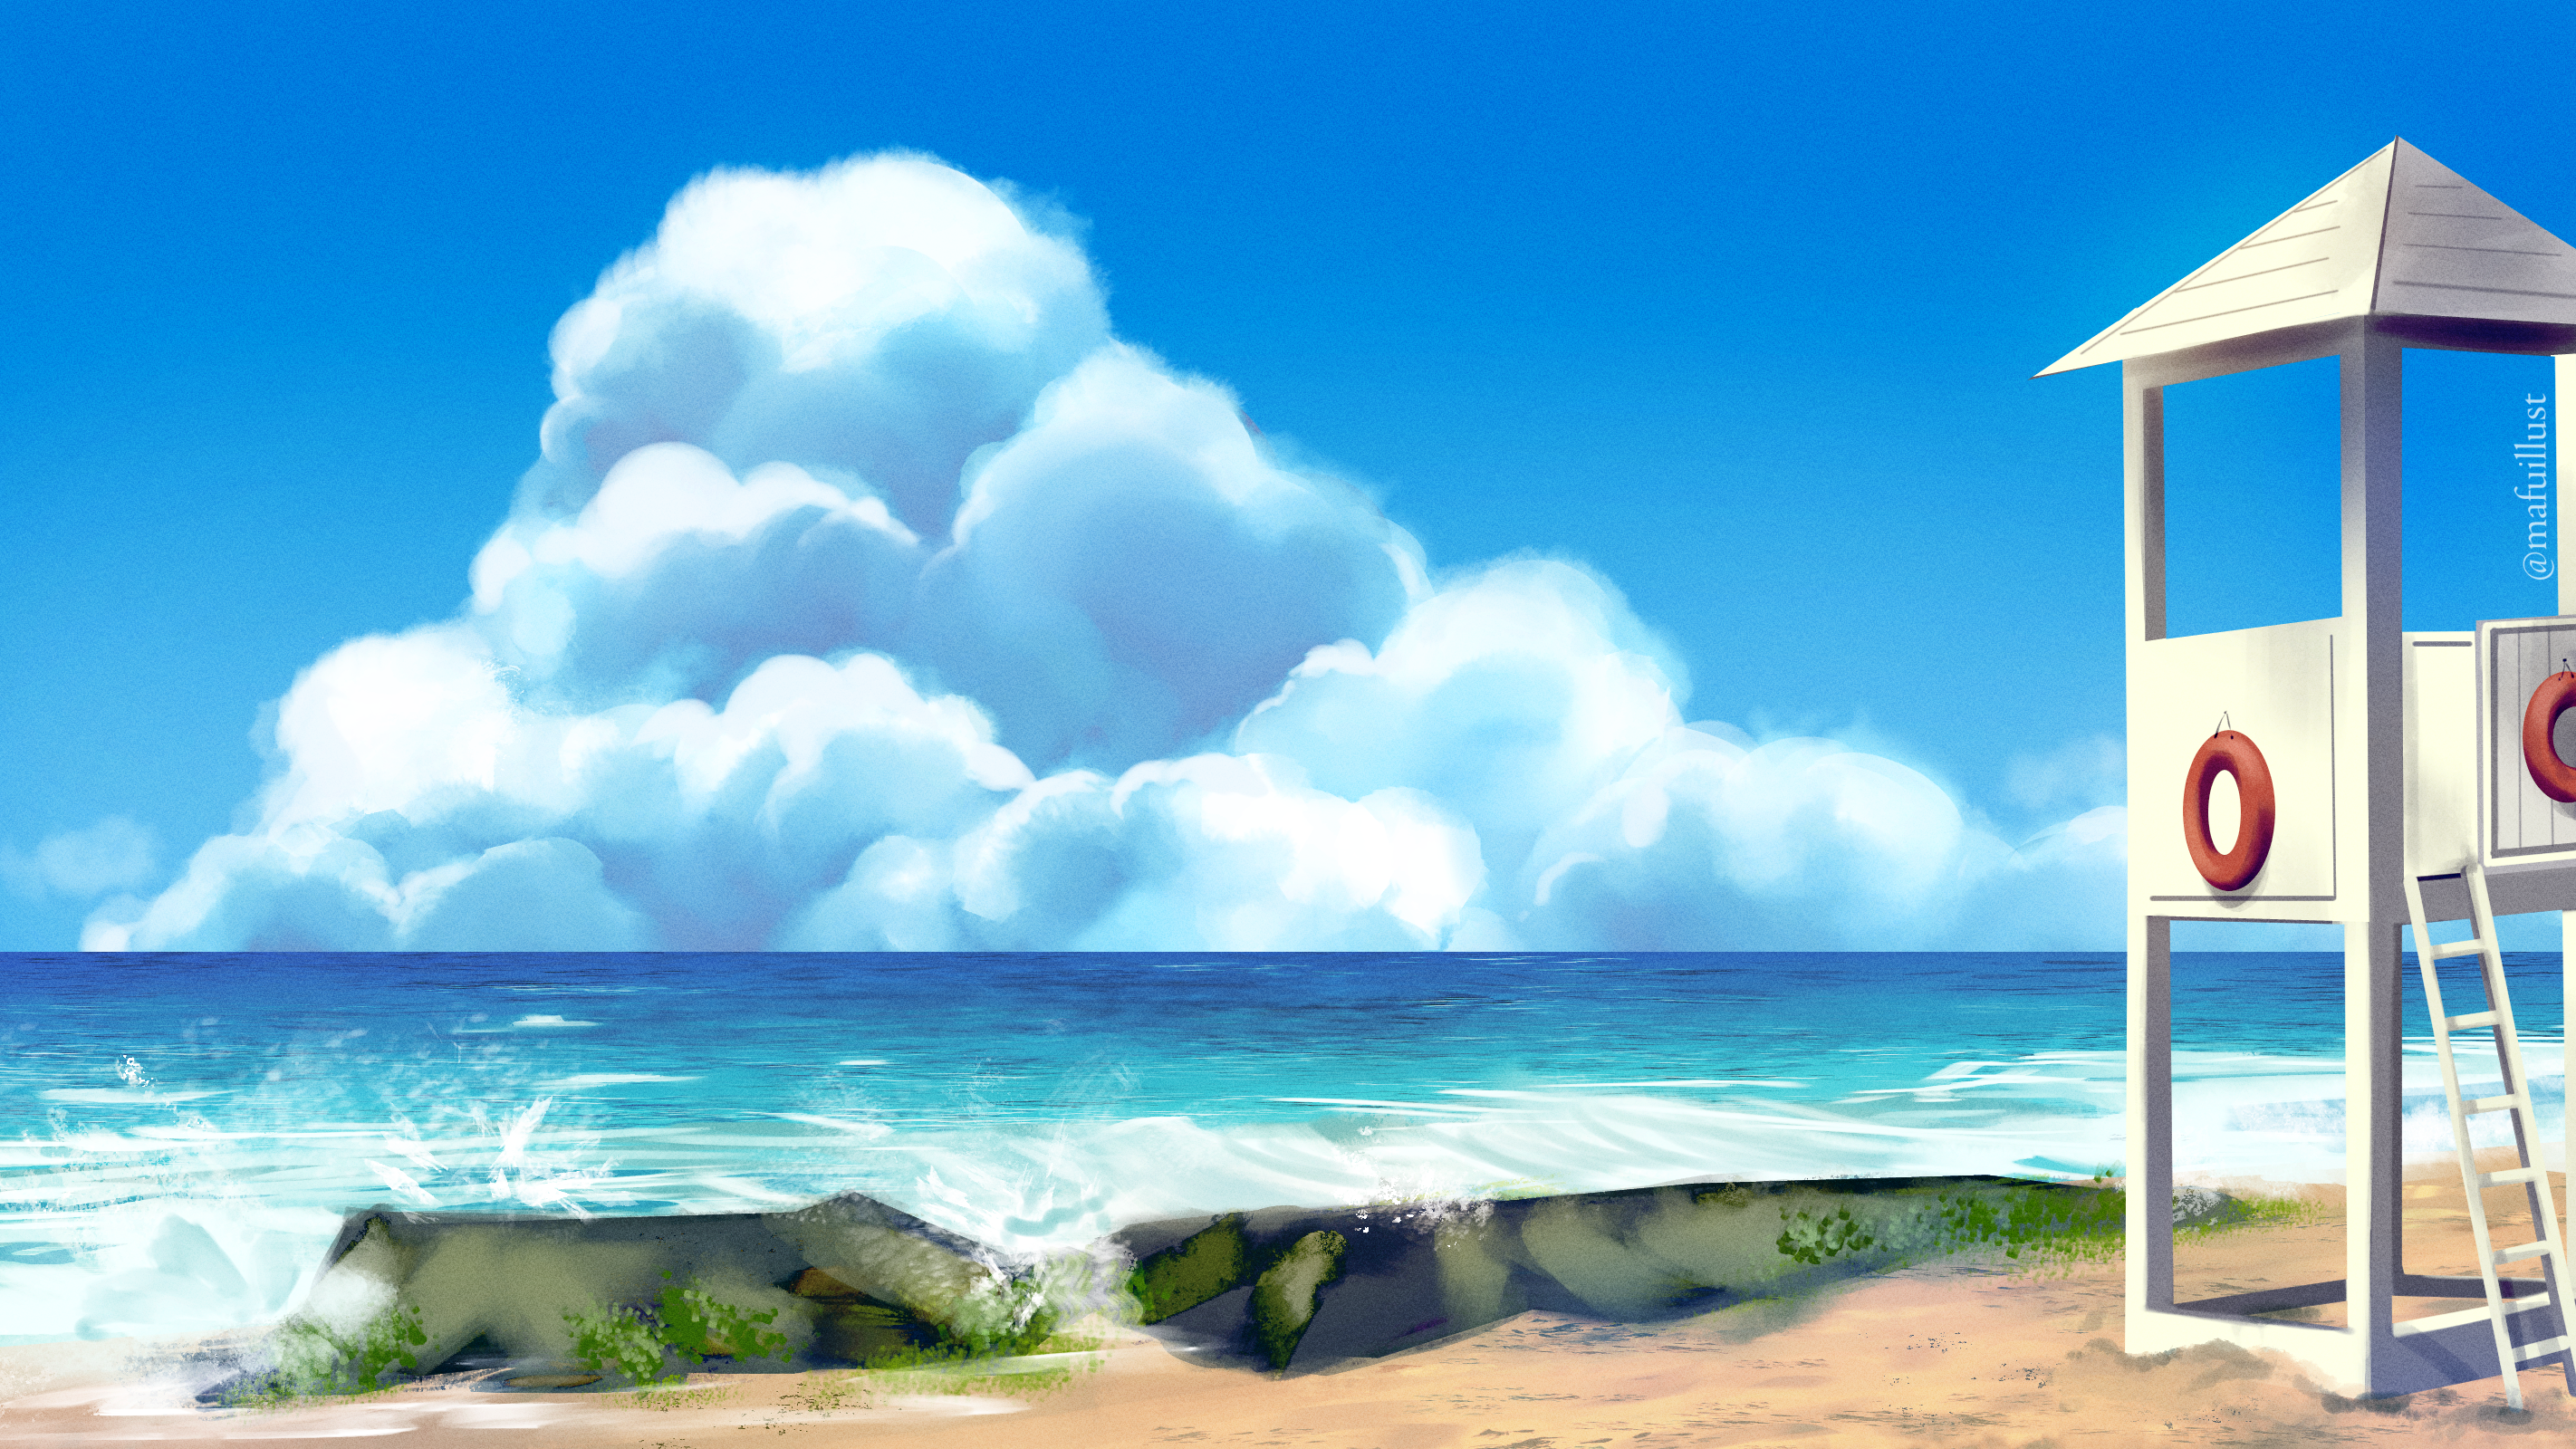 Beach style background TUTORIAL AND PROCESS by Mafuillust STUDIO TIPS